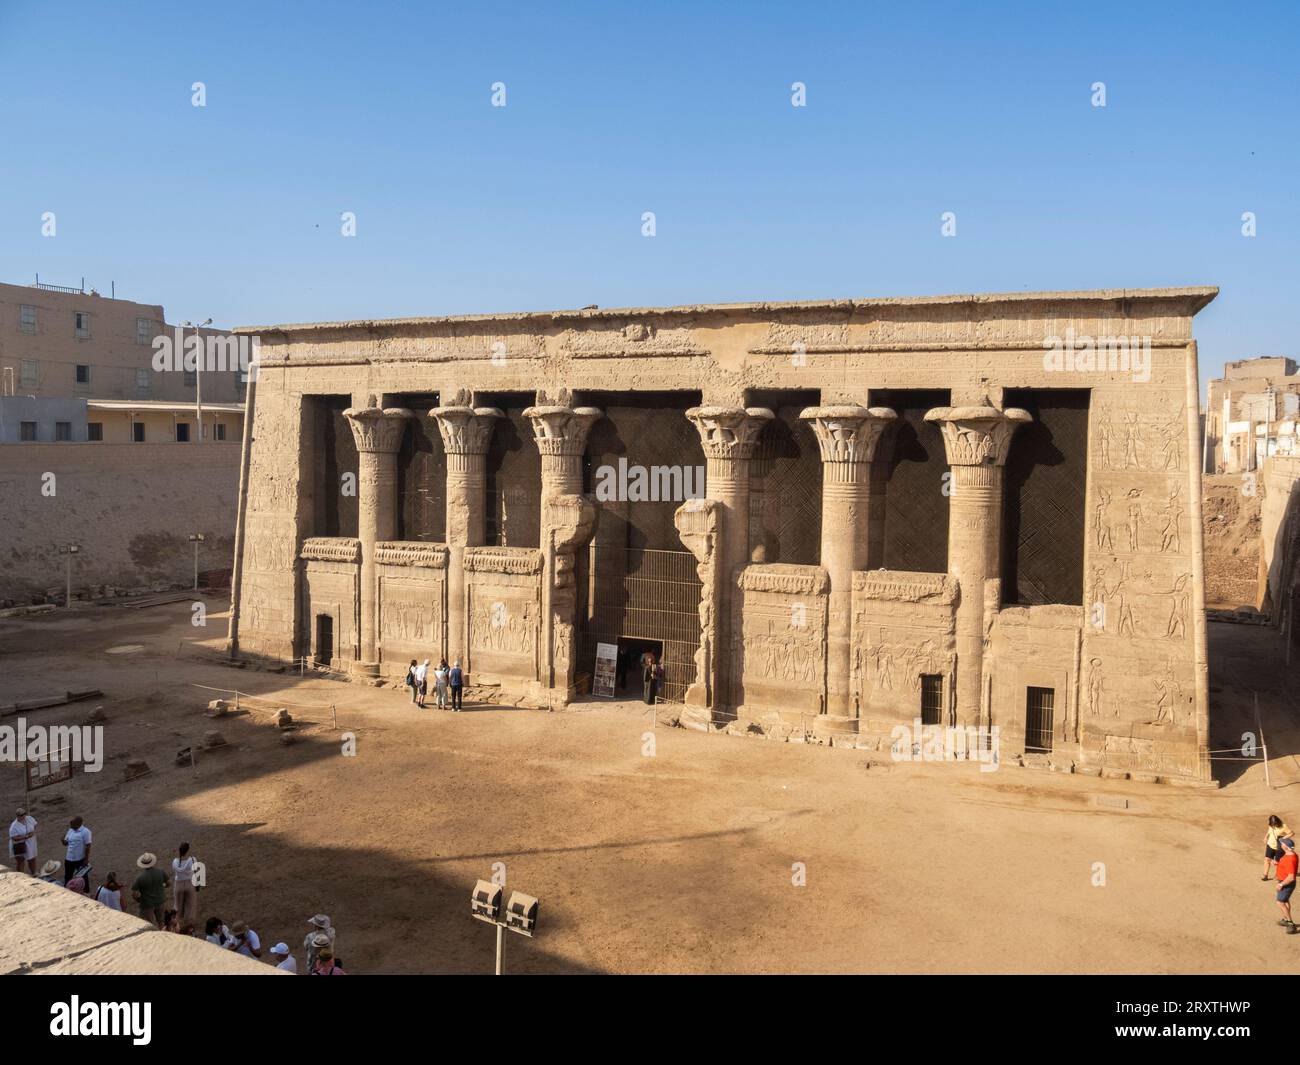 The Temple of Hathor, which began construction in 54 BCE, part of the Dendera Temple complex, Dendera, Egypt, North Africa, Africa Stock Photo